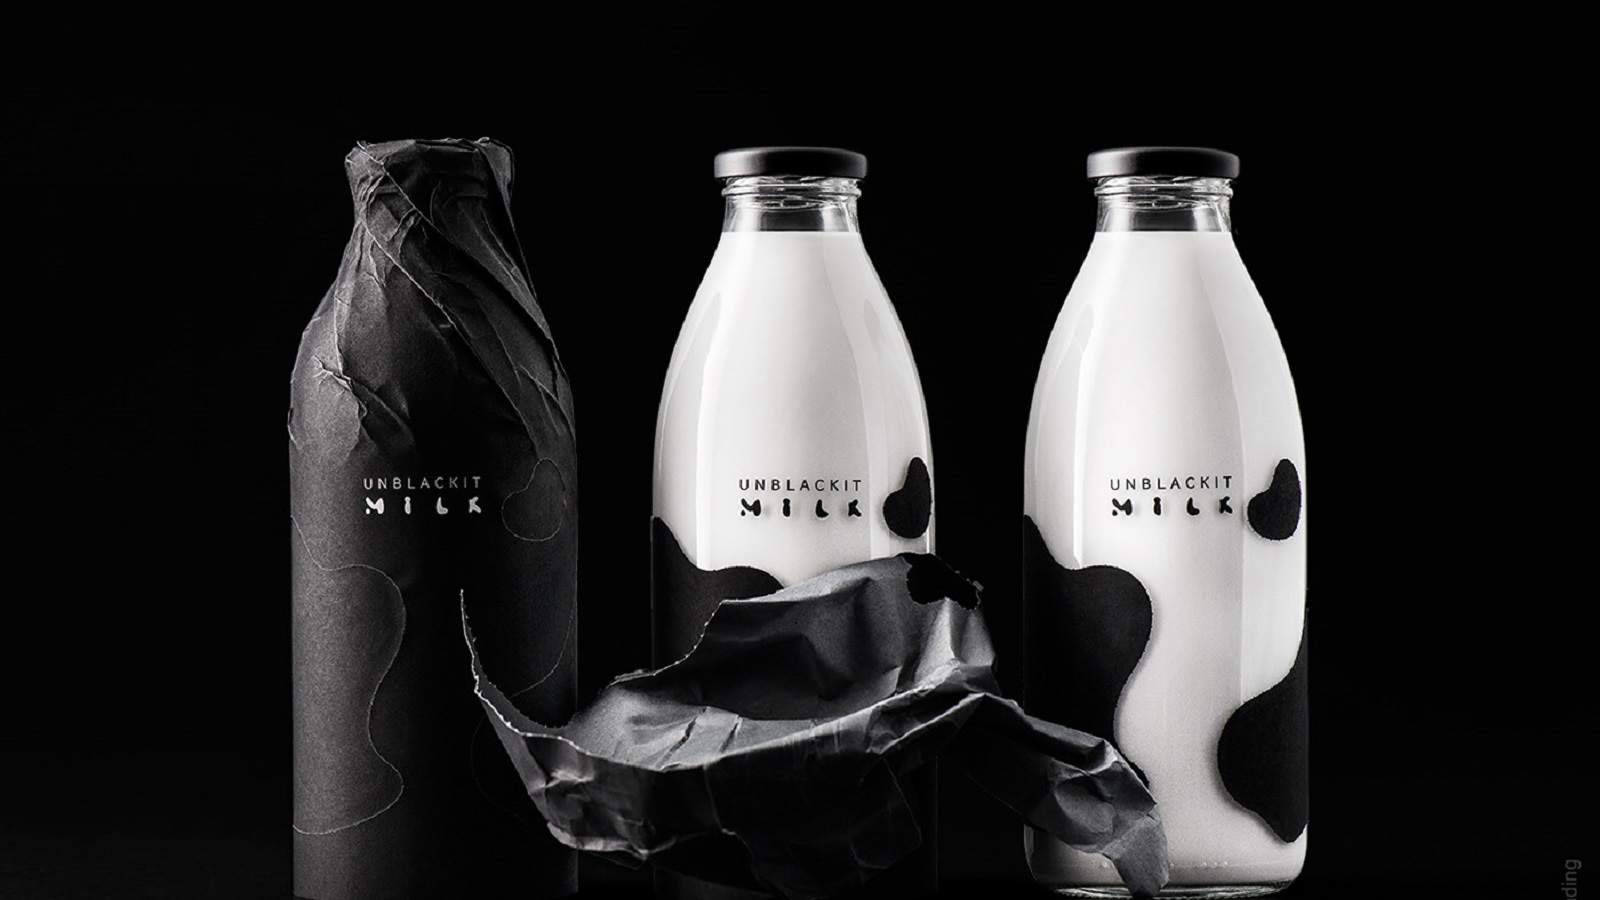 Unblackit! And Get a Lovely Milk Bottle with Cow Spots